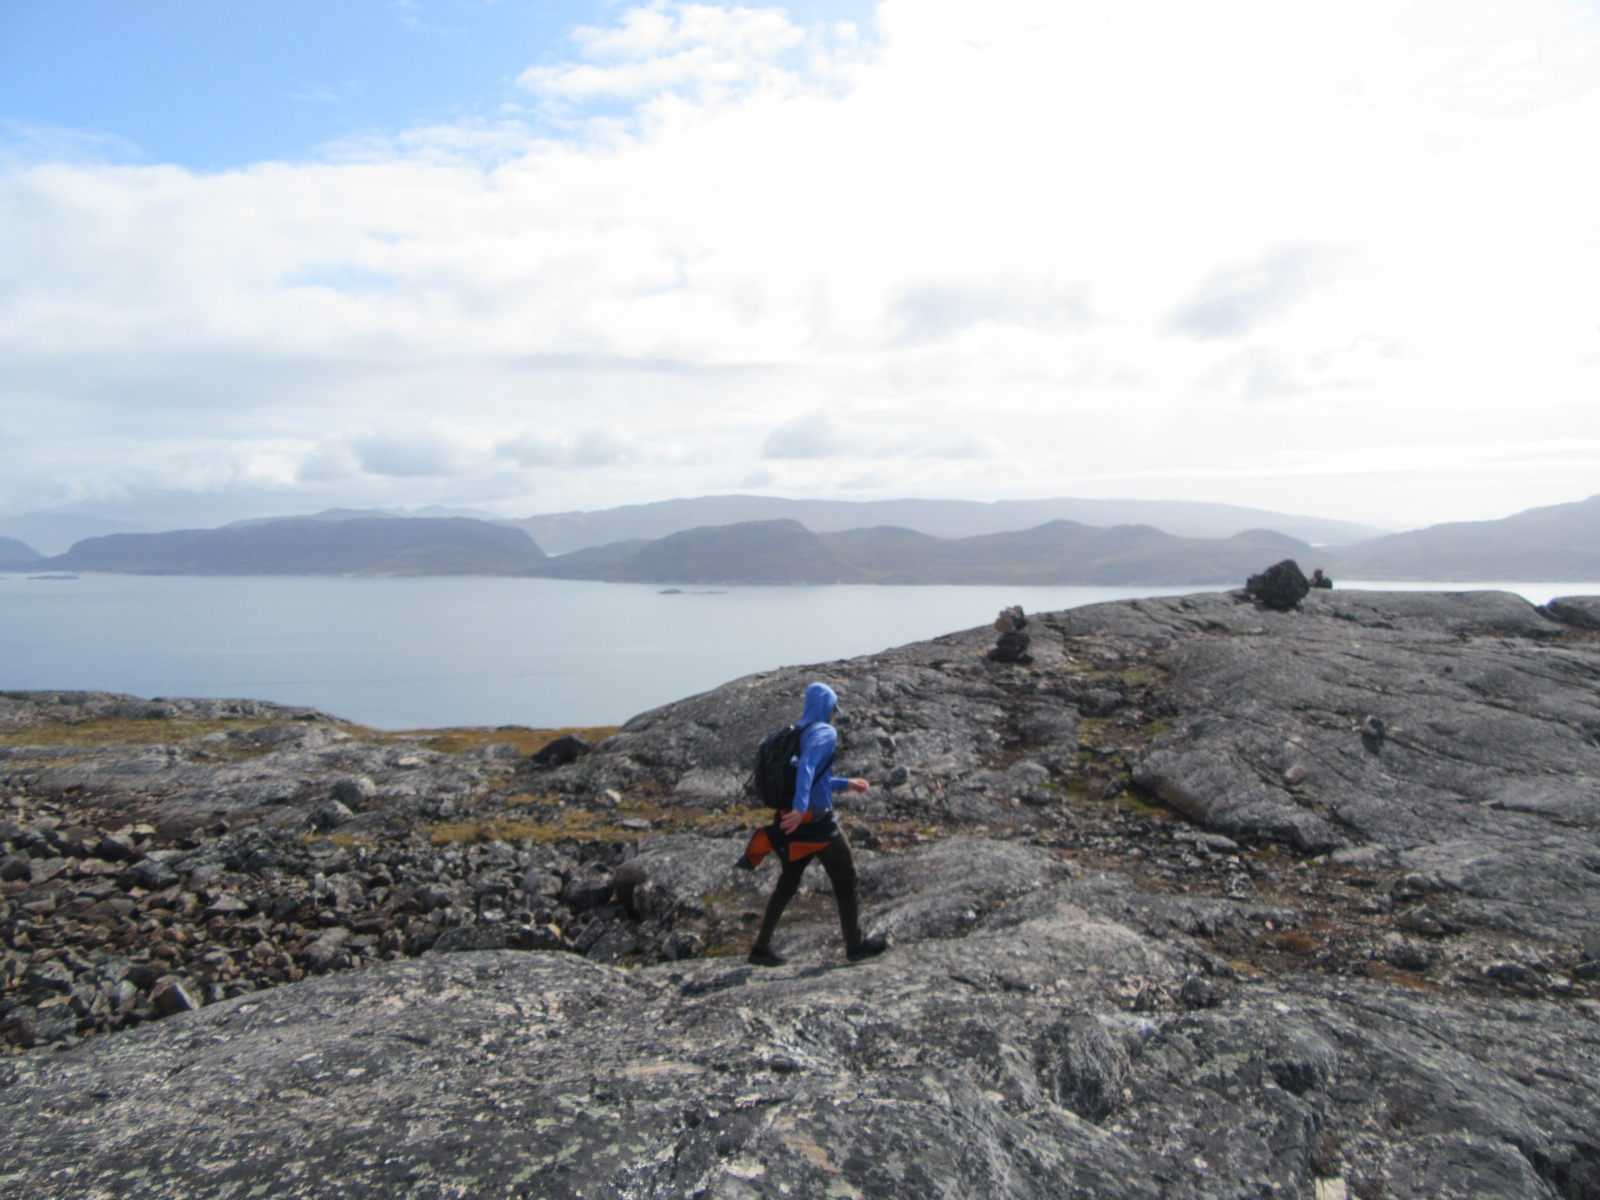 Walking along the ridge to the fijord view